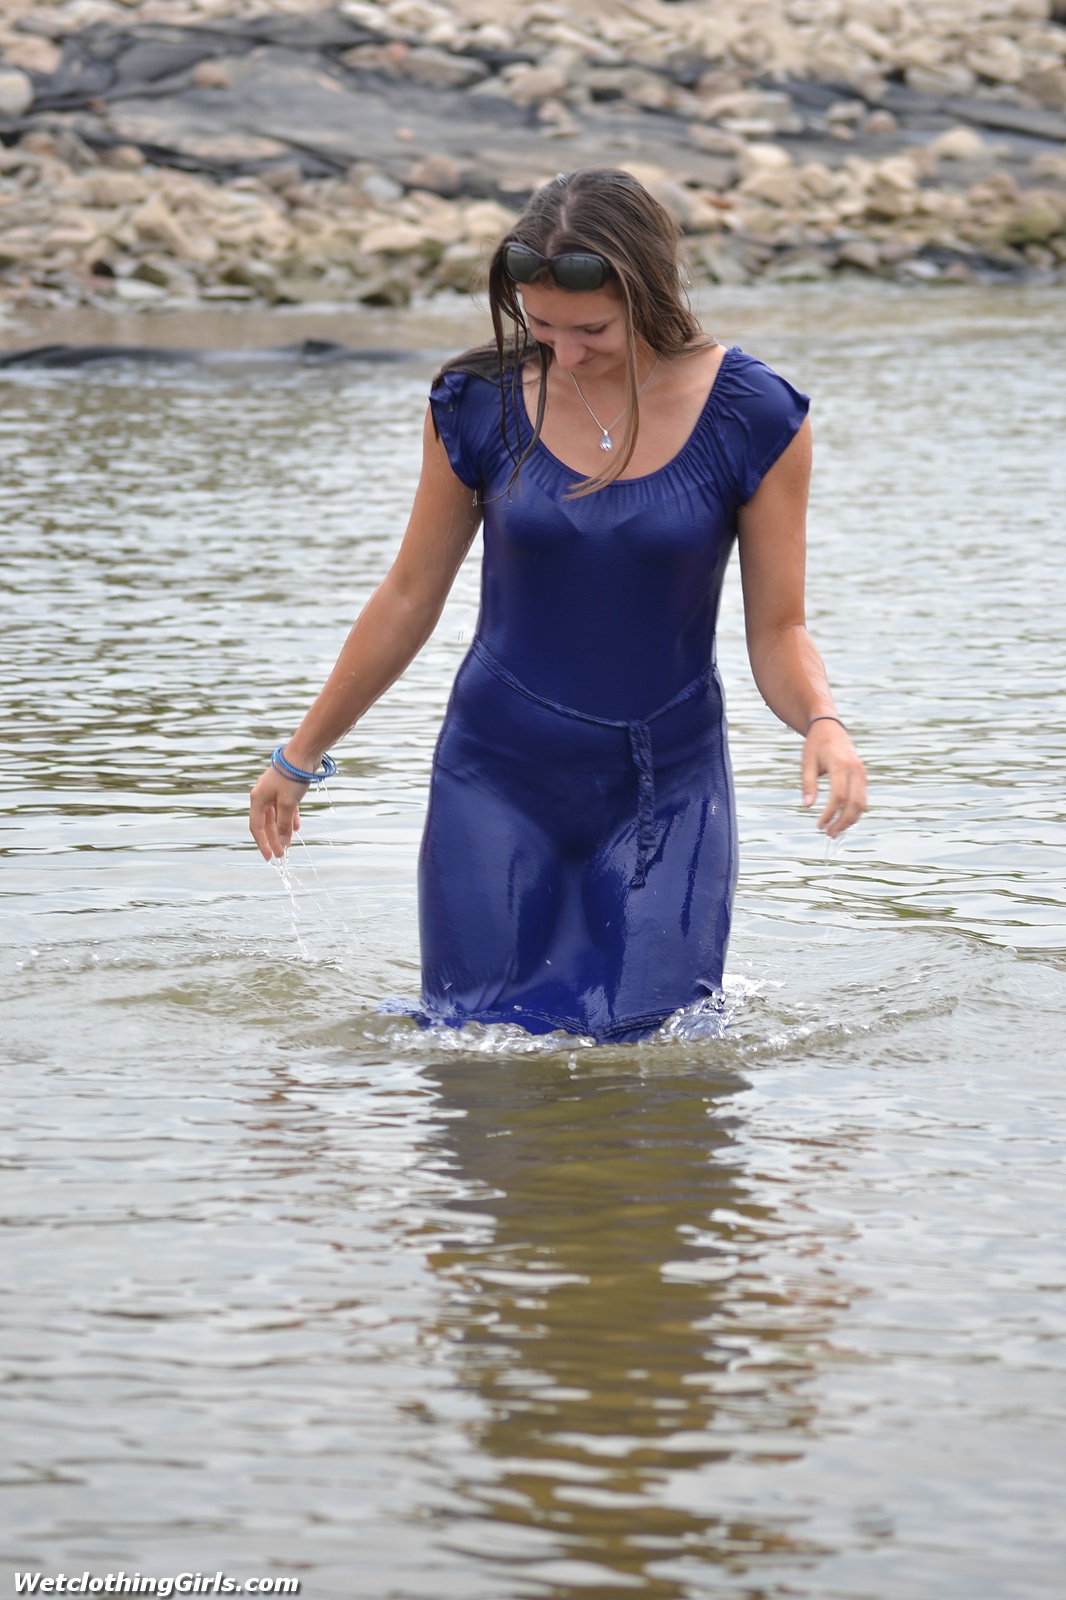 New girl Martyna in a very tight blue dress looks great when soaked! 